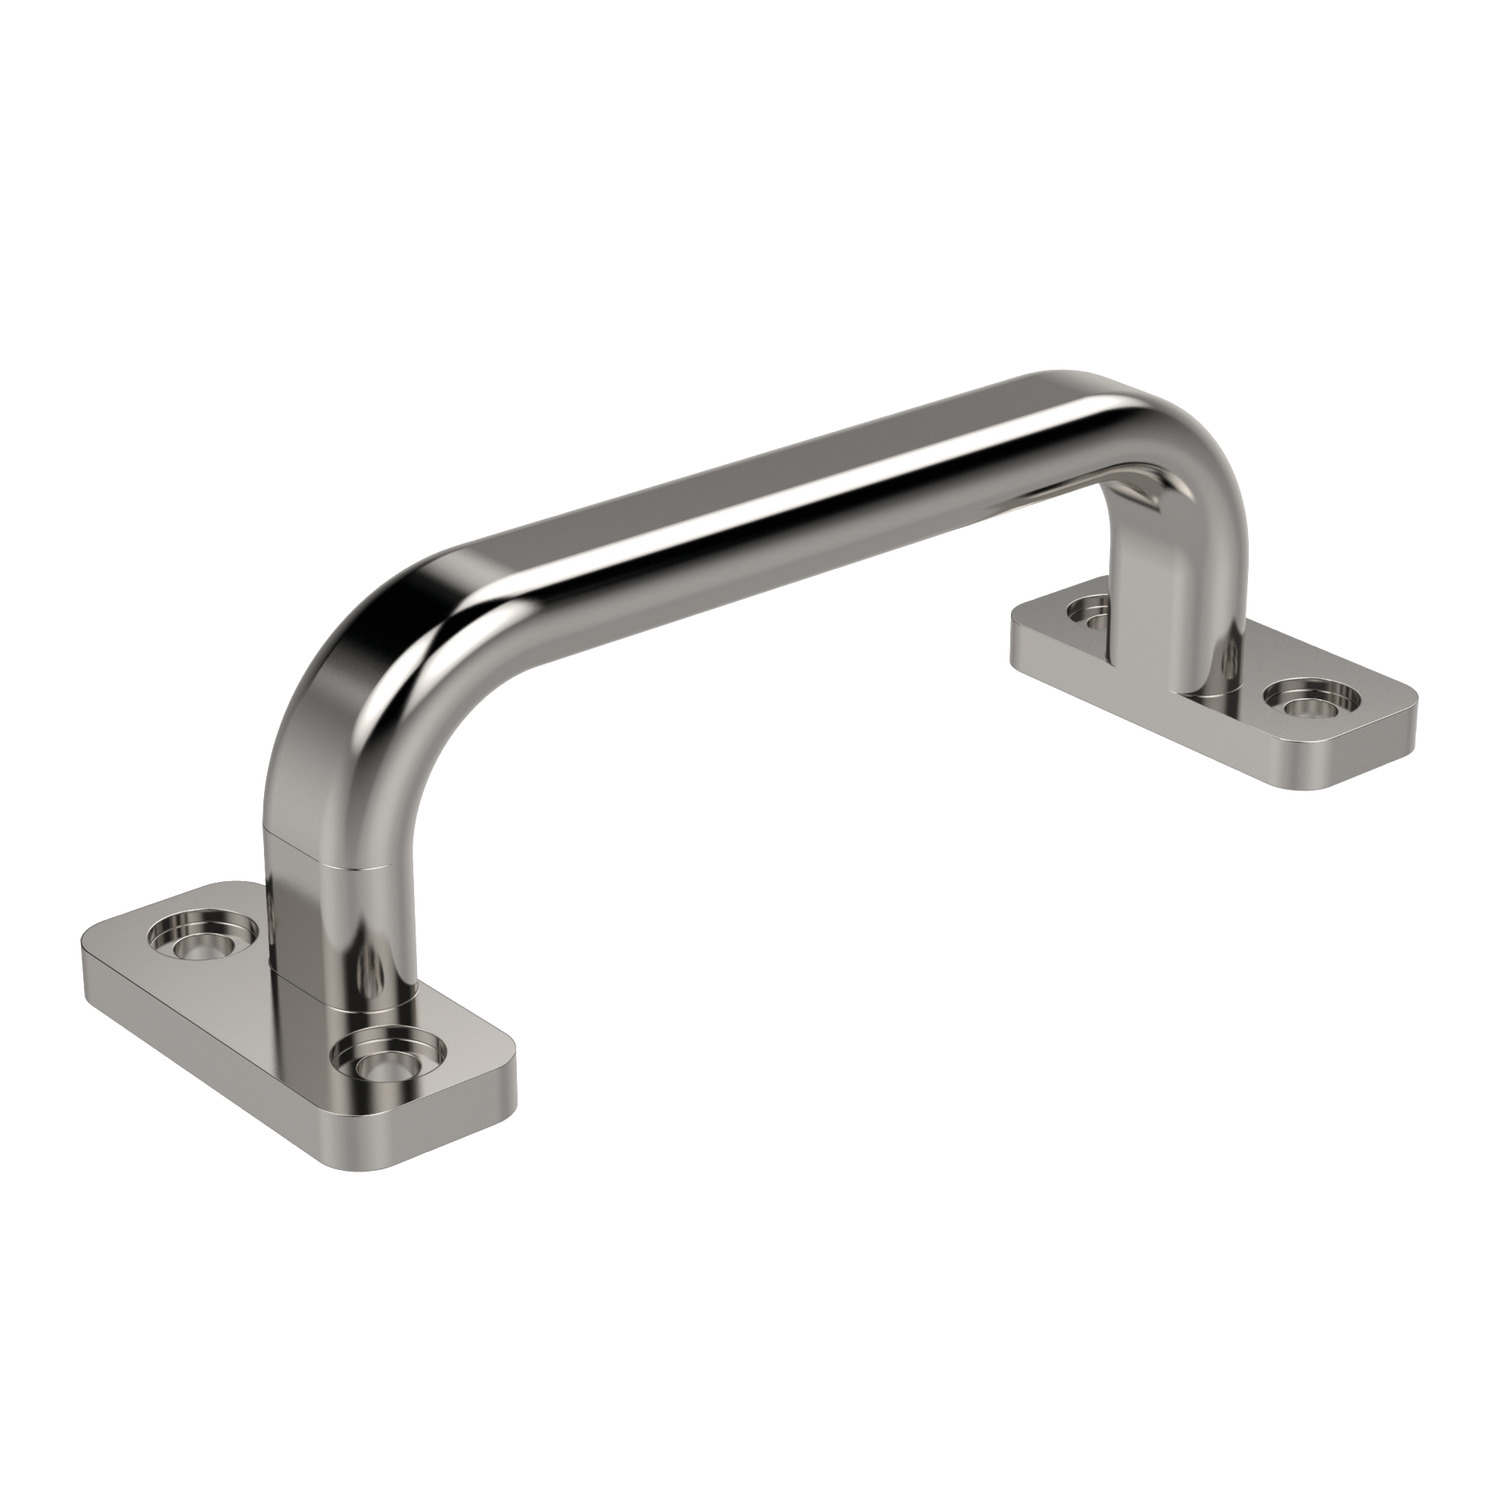 78890 - Pull Handles, Stainless Steel